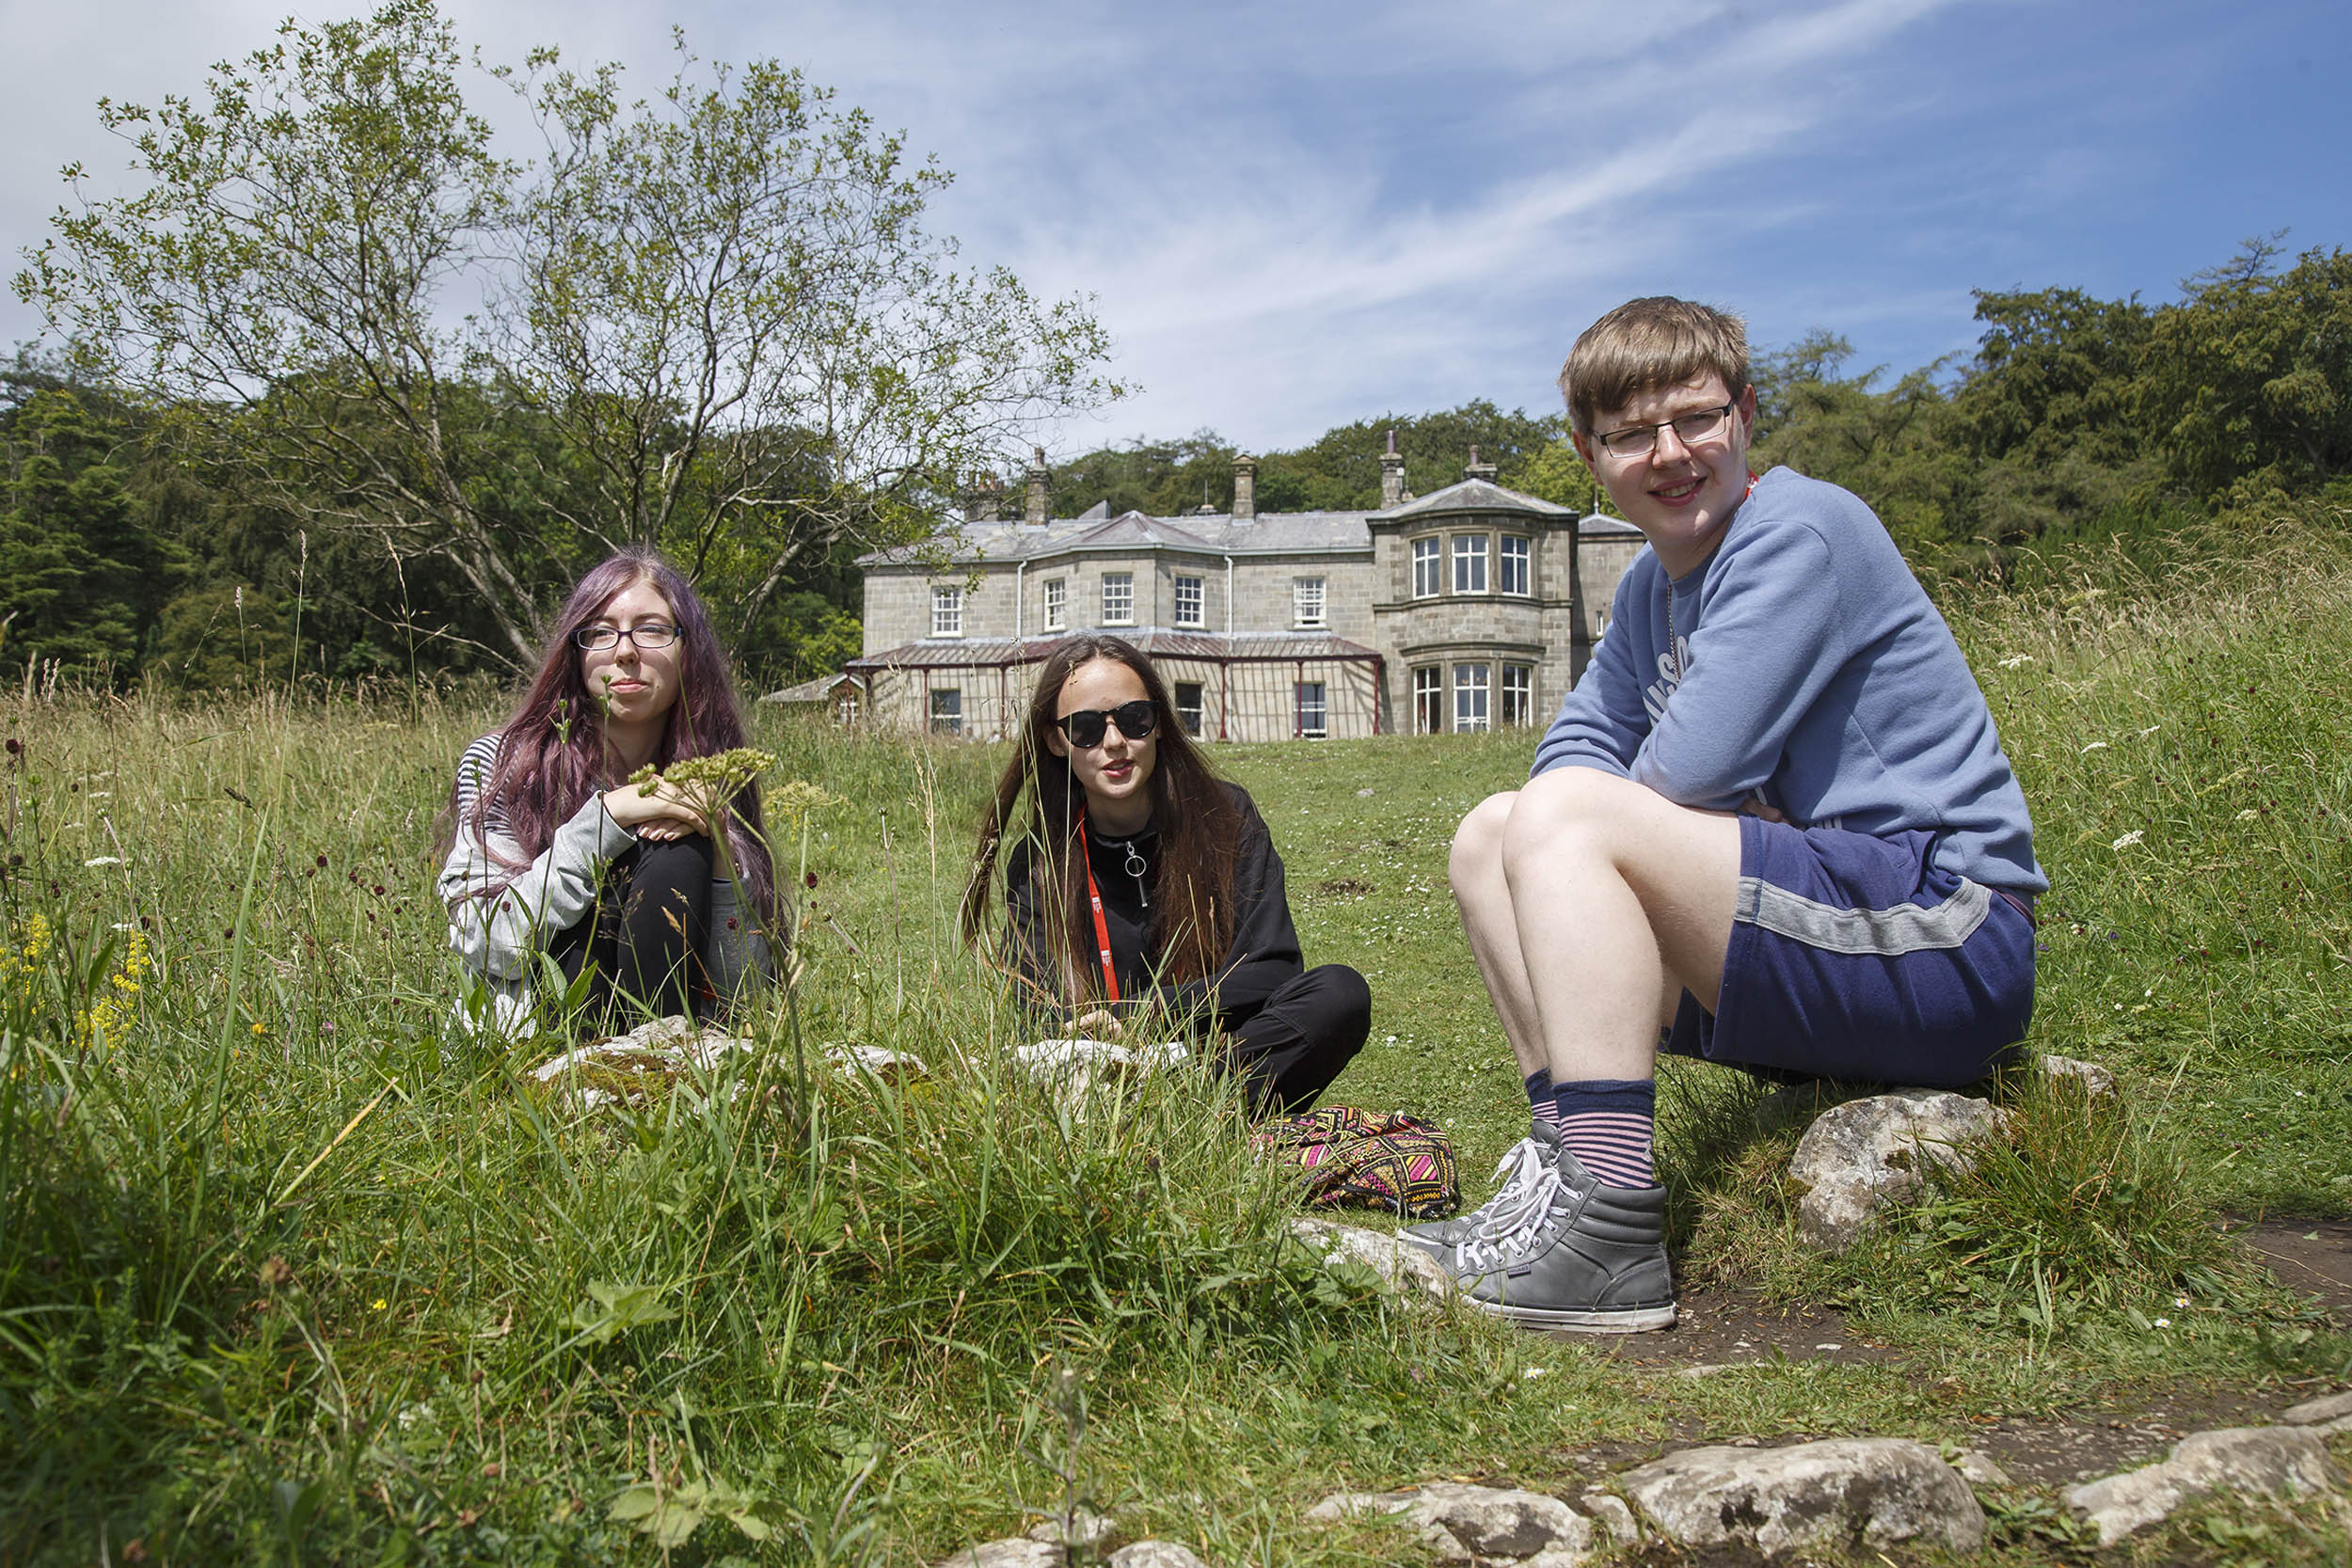  A photograph taken at the British Ecological Society Summer School at Malham Tarn, Yorkshire 